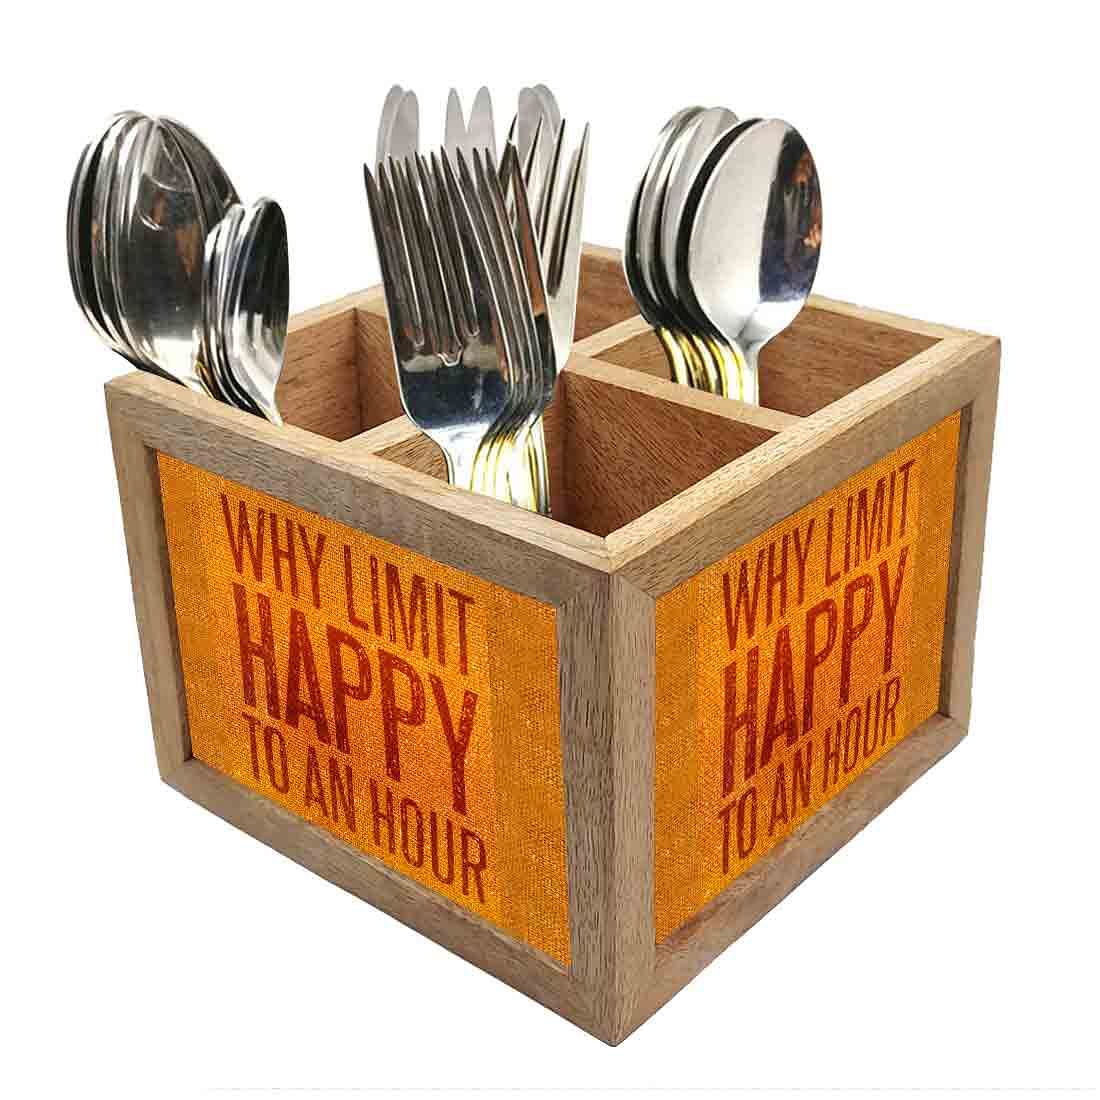 Why Limit Happy Cutlery Holder Stand Silverware Caddy Organizer for Spoons, Forks & Knives-Made of Pinewood Nutcase